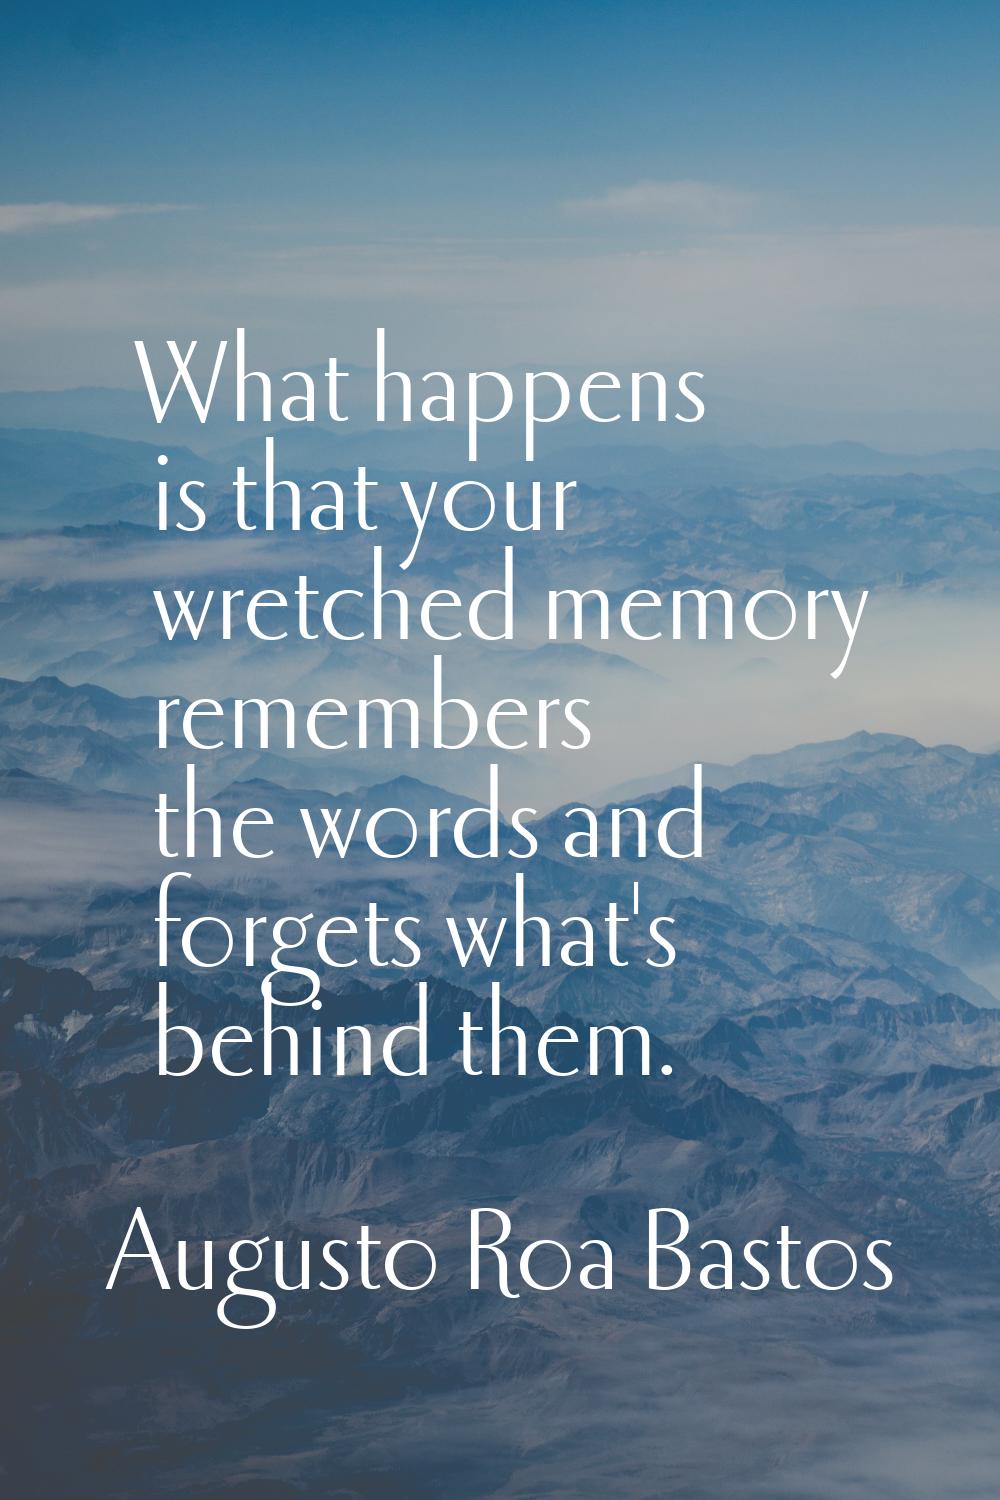 What happens is that your wretched memory remembers the words and forgets what's behind them.